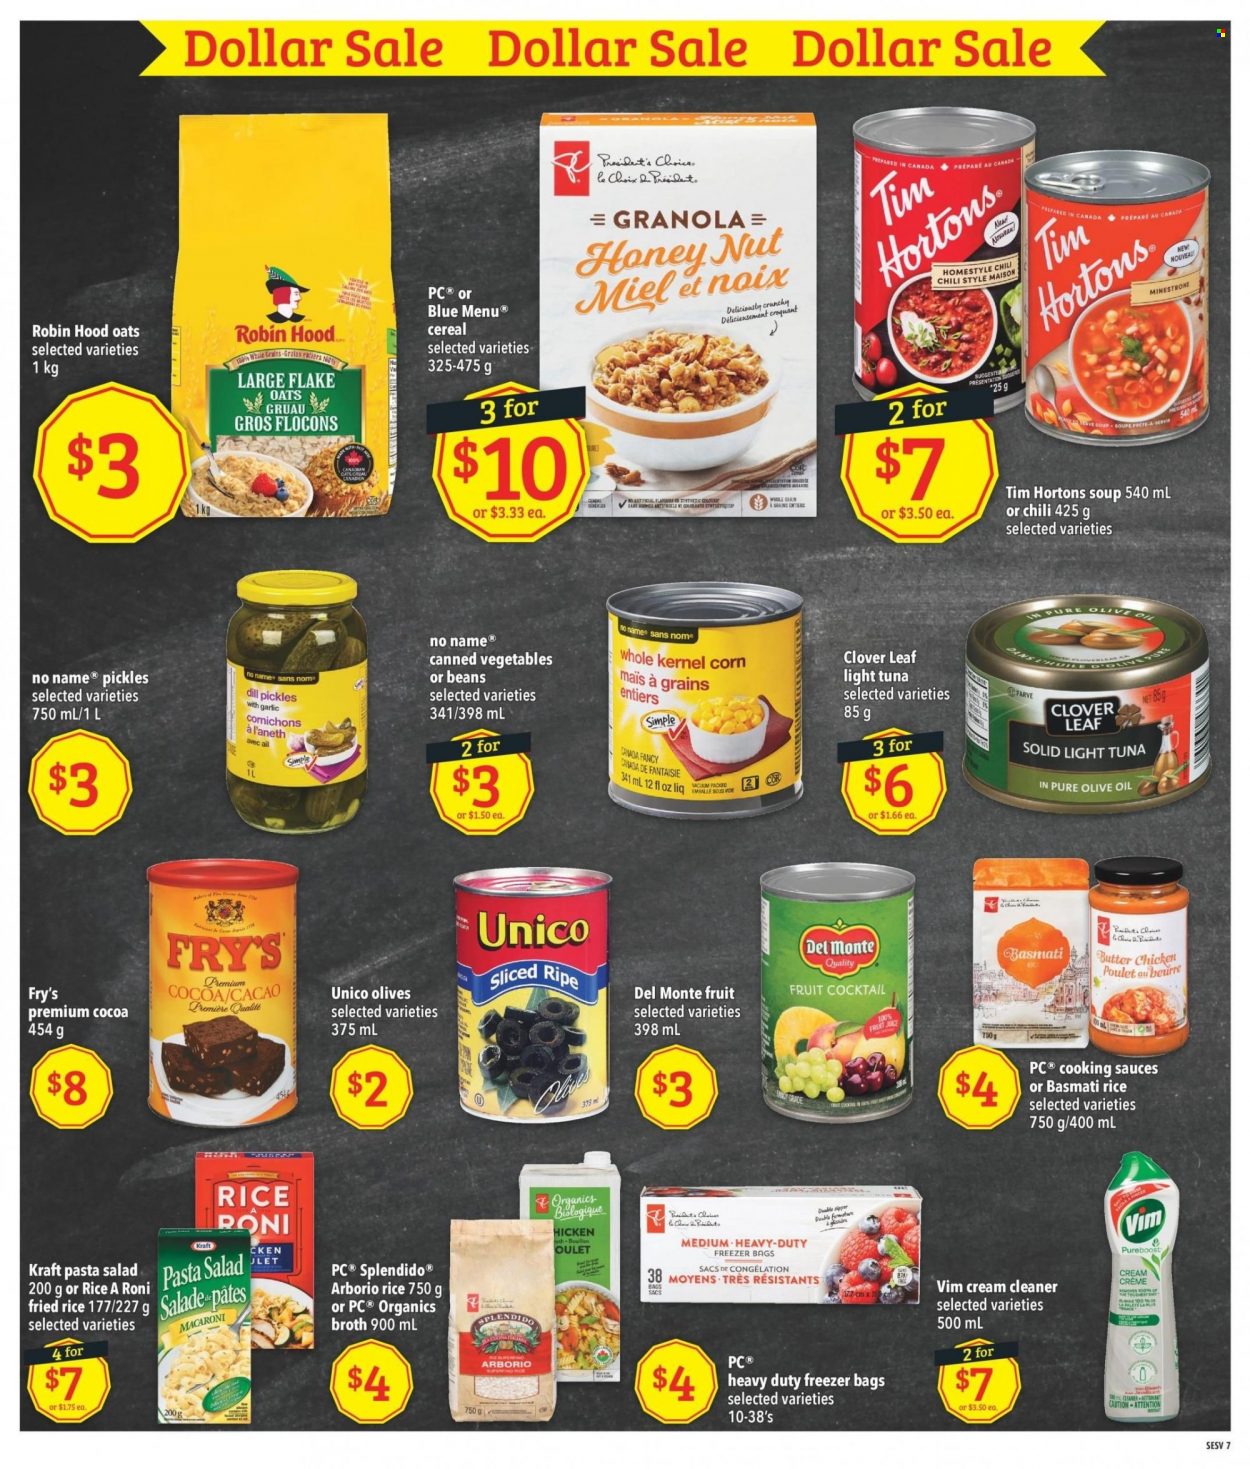 thumbnail - Freshmart Flyer - January 26, 2023 - February 01, 2023 - Sales products - beans, corn, tuna, No Name, macaroni, soup, pasta, Kraft®, pasta salad, Président, Clover, bouillon, cocoa, oats, broth, pickles, canned vegetables, light tuna, Del Monte, cereals, basmati rice, dill, olive oil, oil, cream cleaner, cleaner, PREMIERE, granola, olives. Page 11.